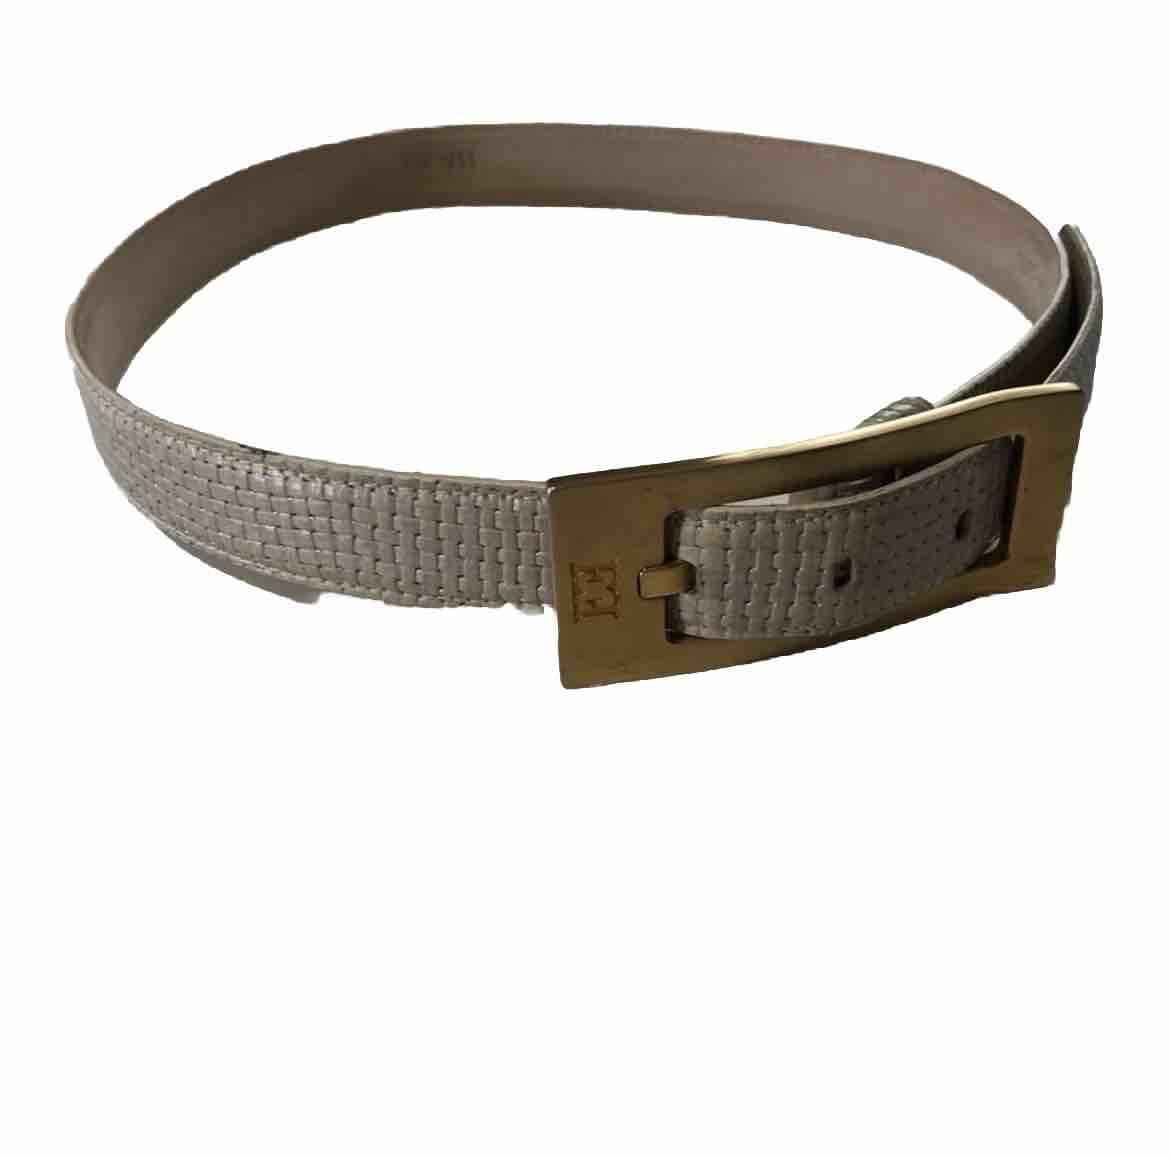 ESCADA made in Italy cream,gold leather belt - image 2